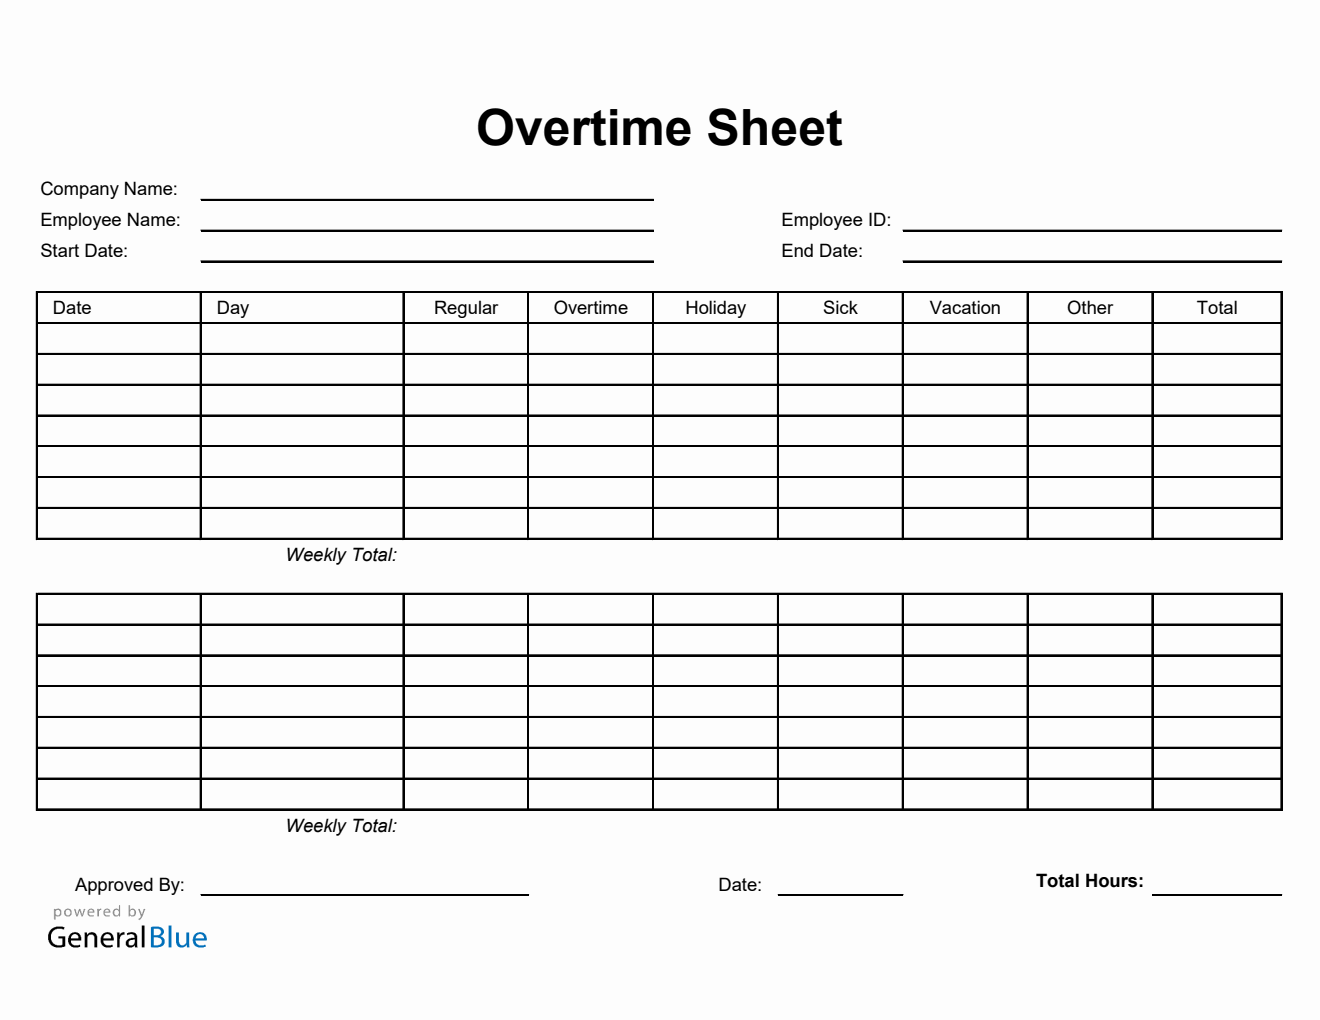 Overtime Sheet in Excel (Simple)